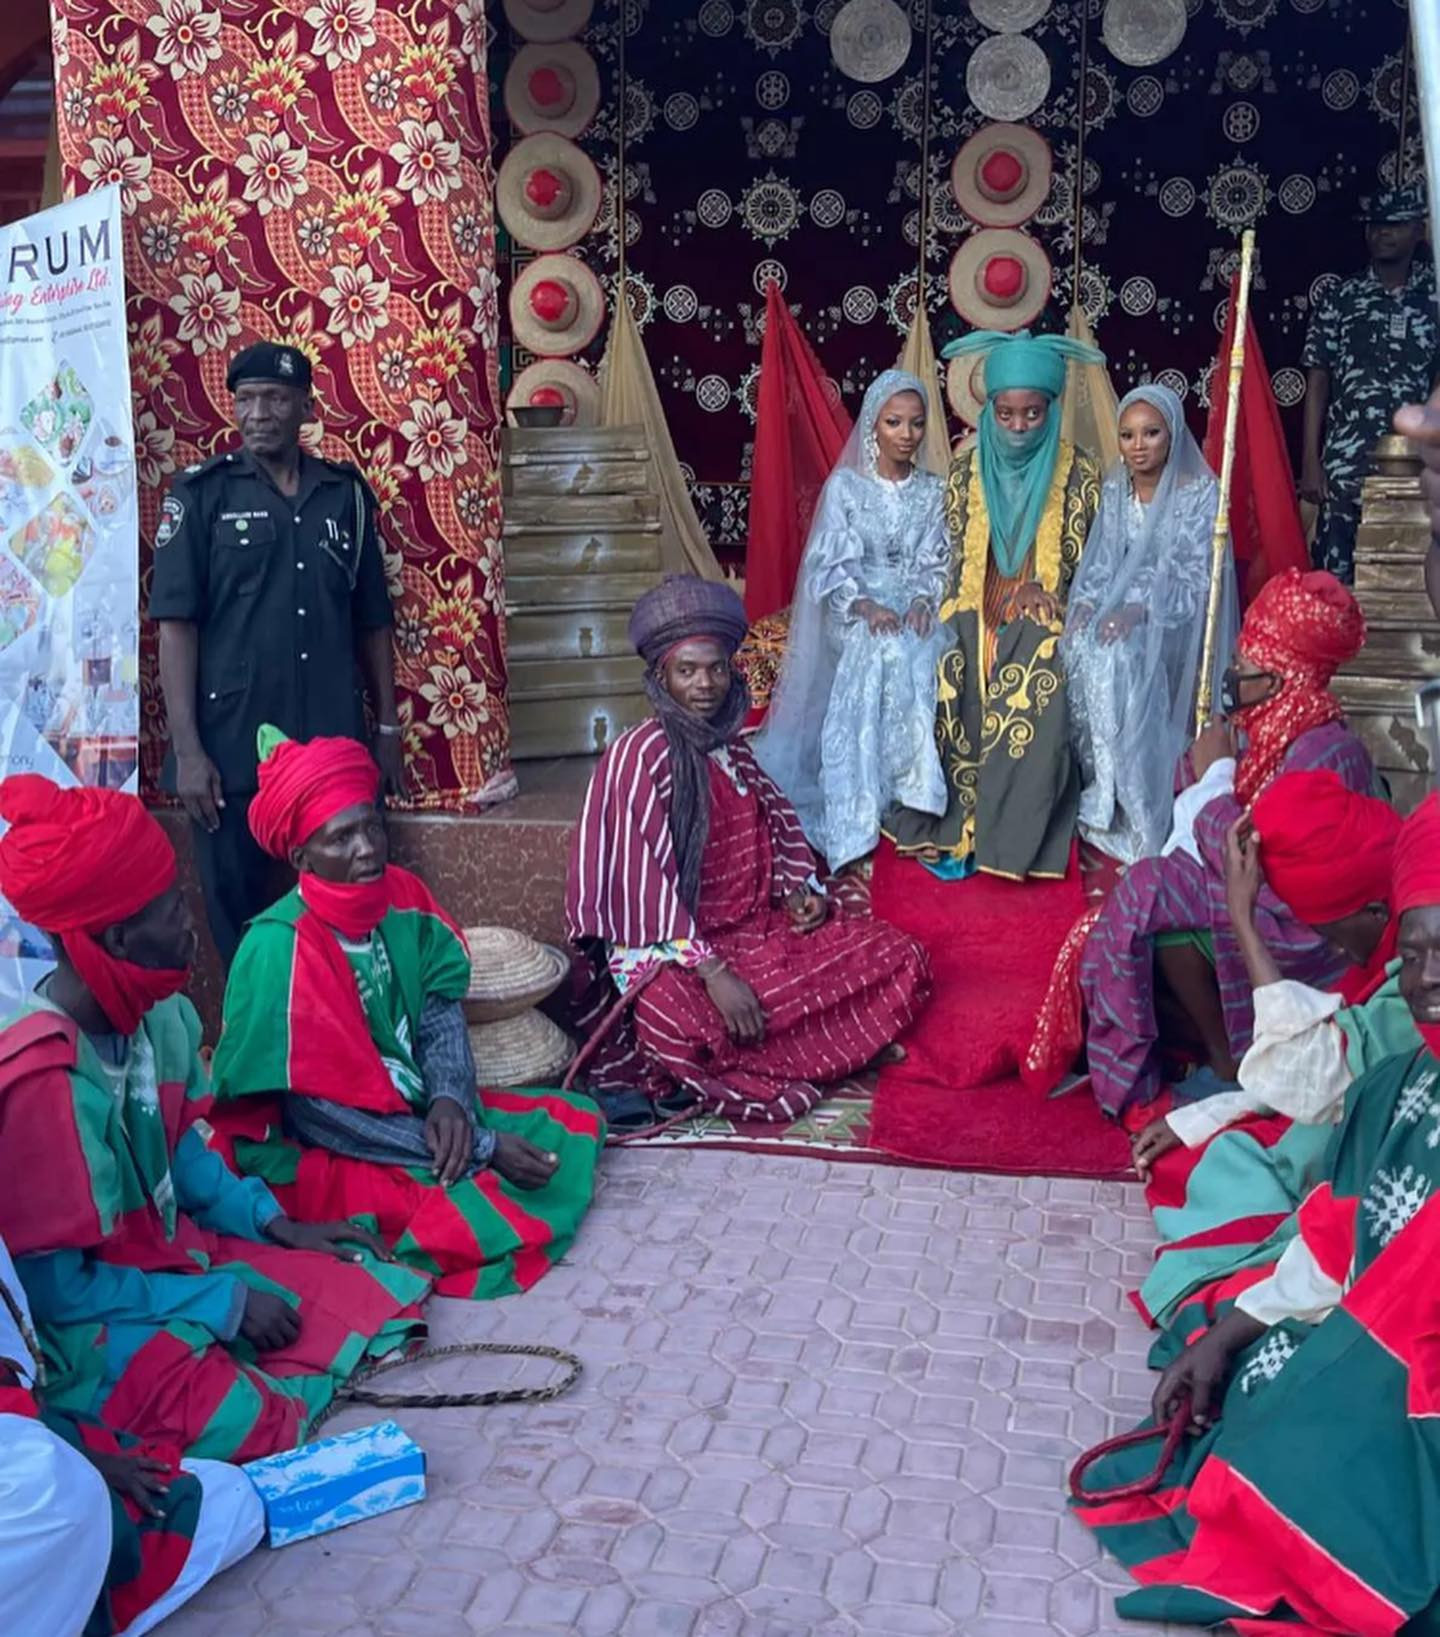 Son of late Emir of Kano marries two wives same day 